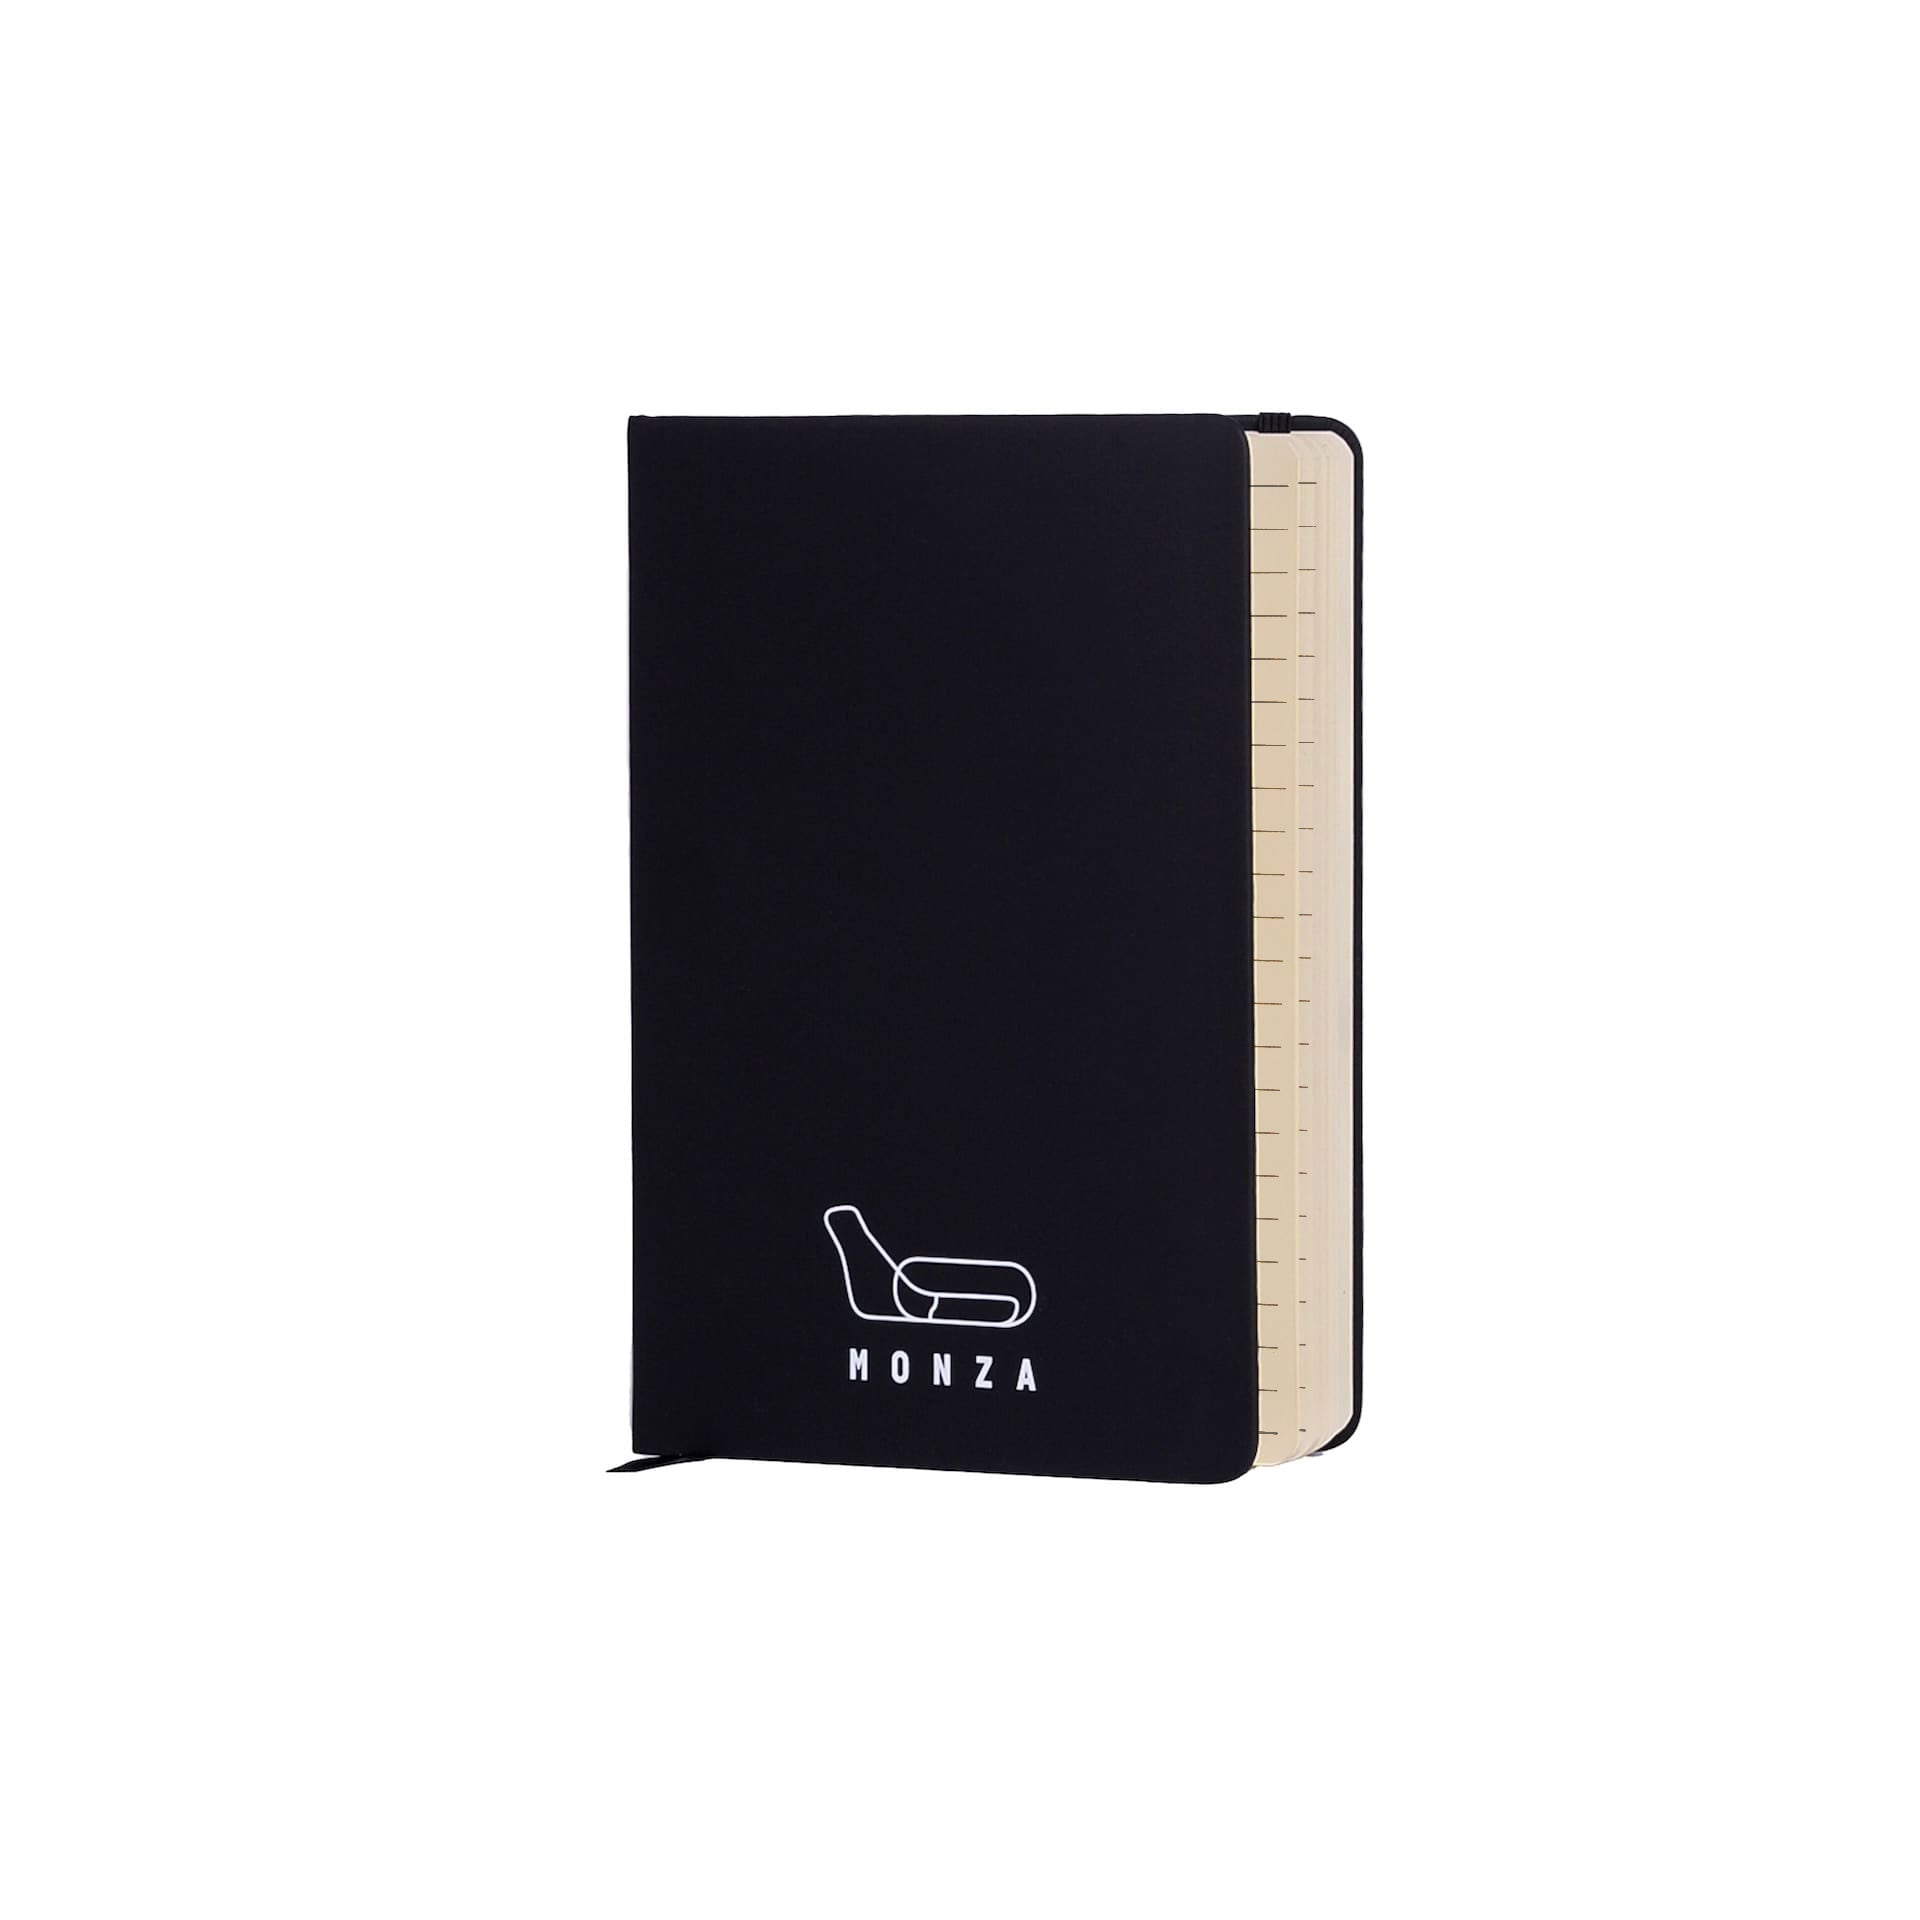 Black Monza diary with hard lined cover